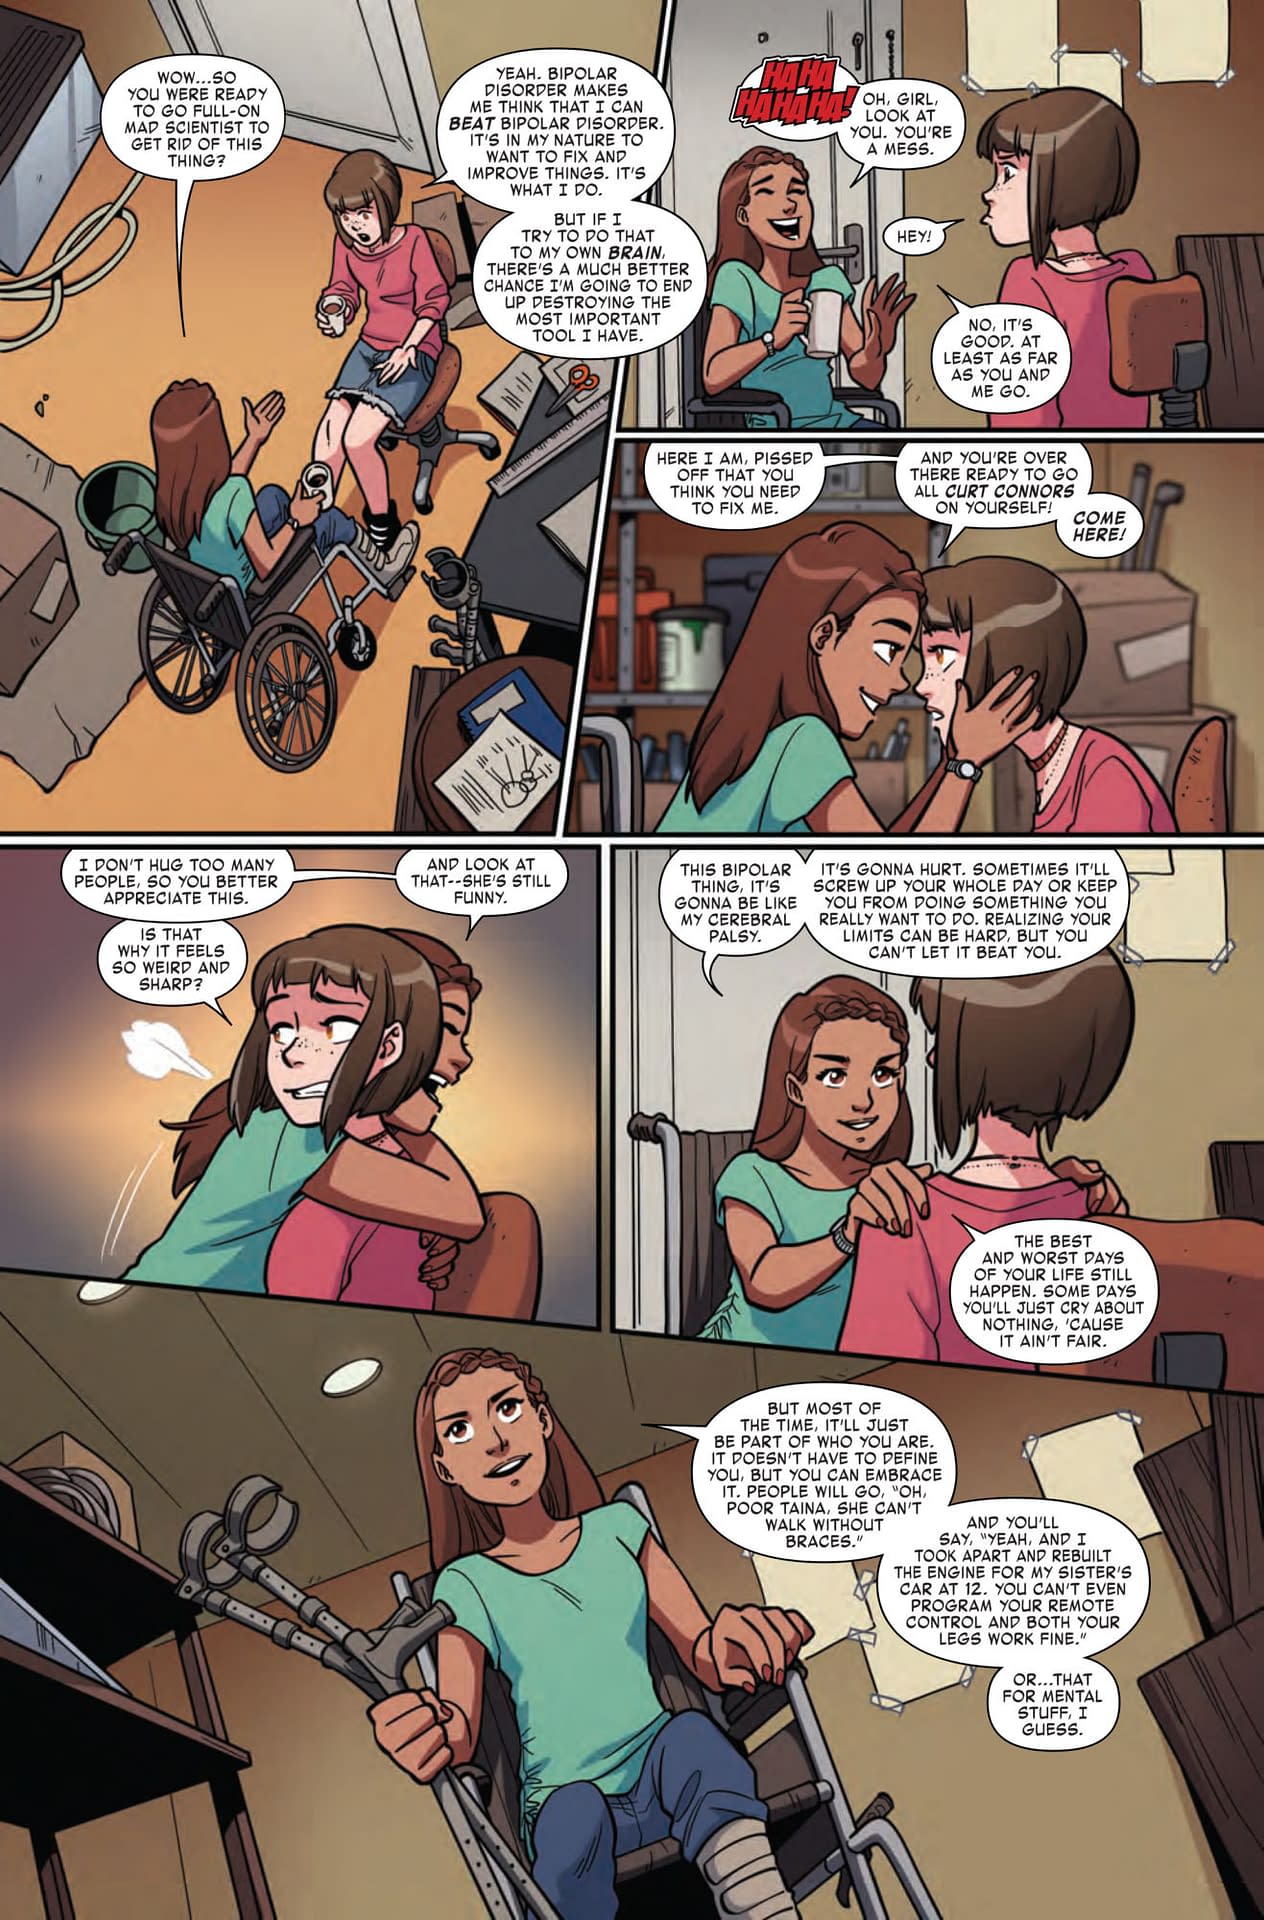 Where Nadia Can Stick Her Privileged, Ableist Apology in Next Week's Unstoppable Wasp #6